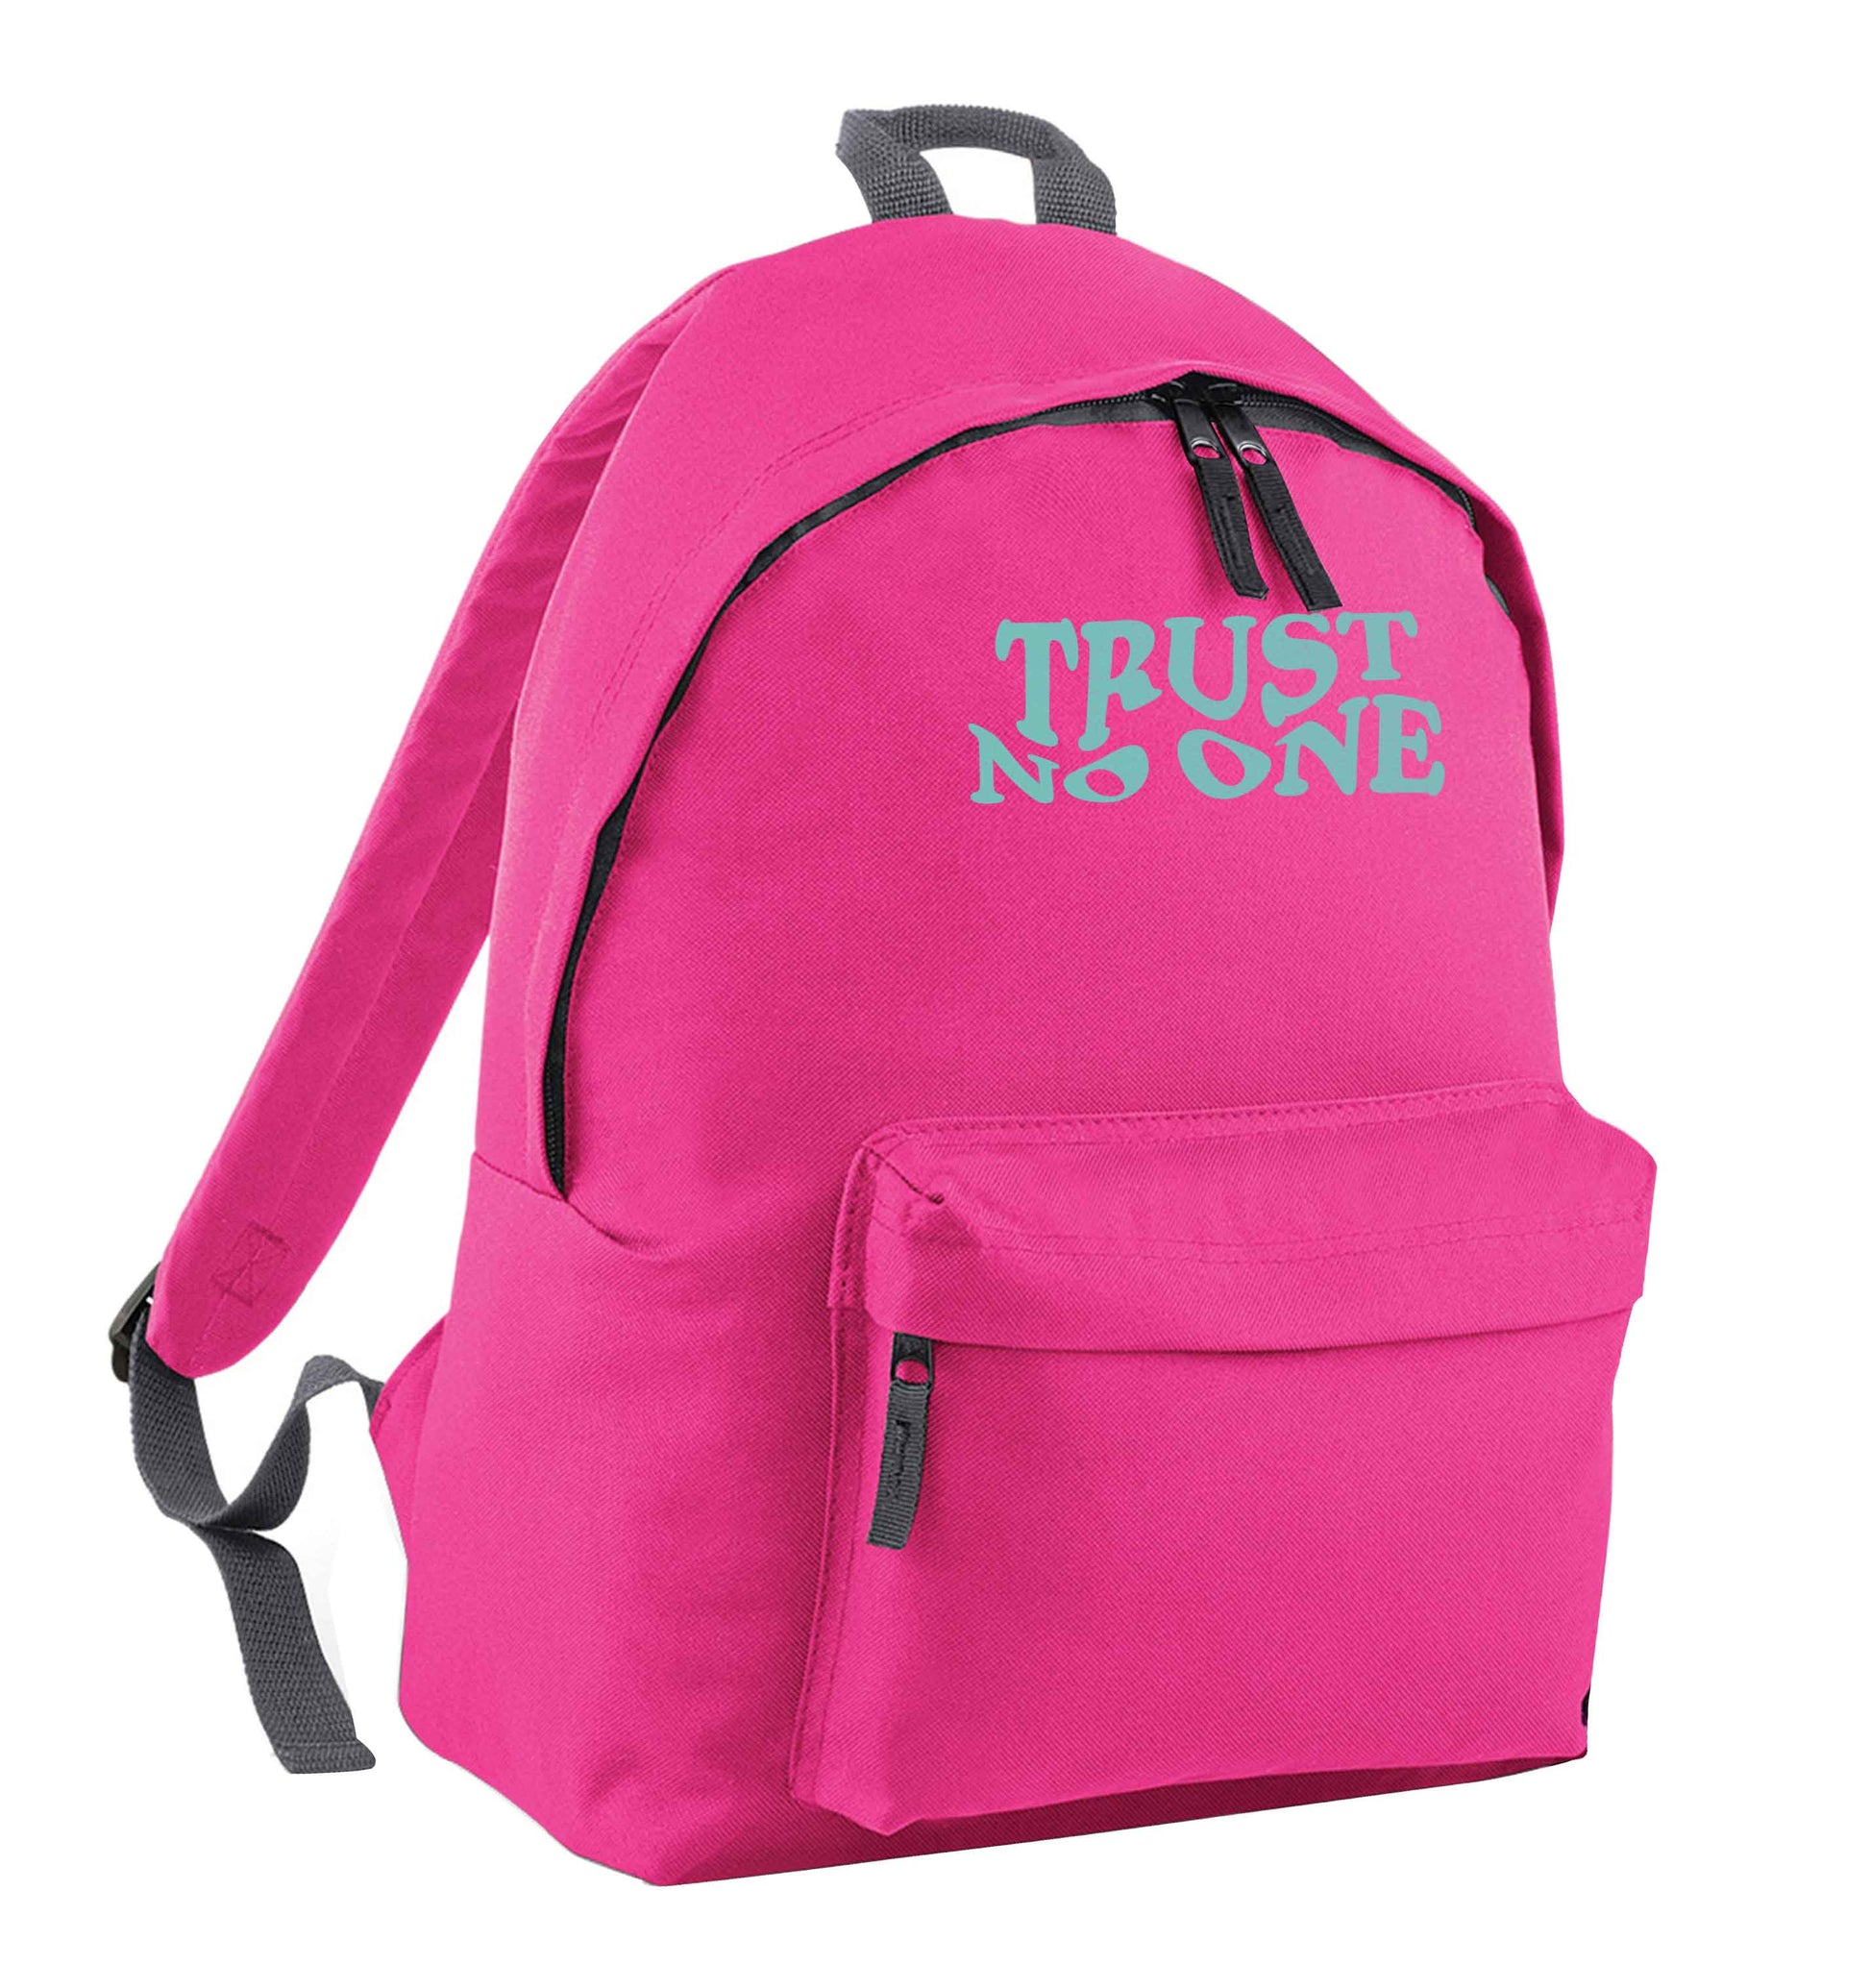 Trust no one pink adults backpack